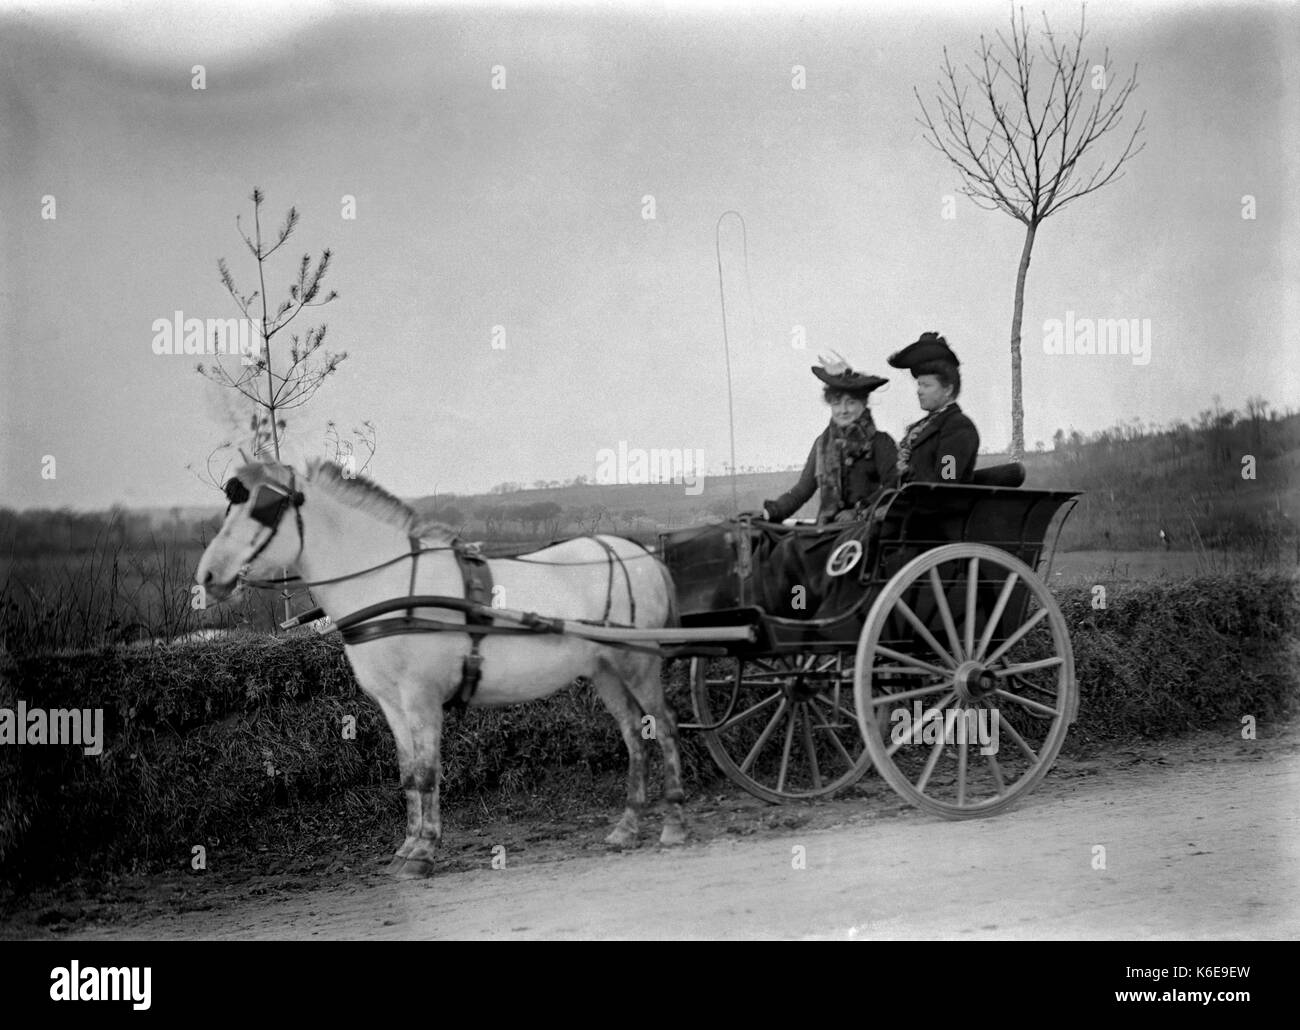 AJAXNETPHOTO. 1891-1910 (APPROX). SAINT-LO REGION, NORMANDY.FRANCE. - TWO LADIES IN A TRAP POSE FOR THE CAMERA ON A COUNTRY ROAD. PHOTOGRAPHER:UNKNOWN © DIGITAL IMAGE COPYRIGHT AJAX VINTAGE PICTURE LIBRARY SOURCE: AJAX VINTAGE PICTURE LIBRARY COLLECTION REF:AVL FRA 1890 03 Stock Photo